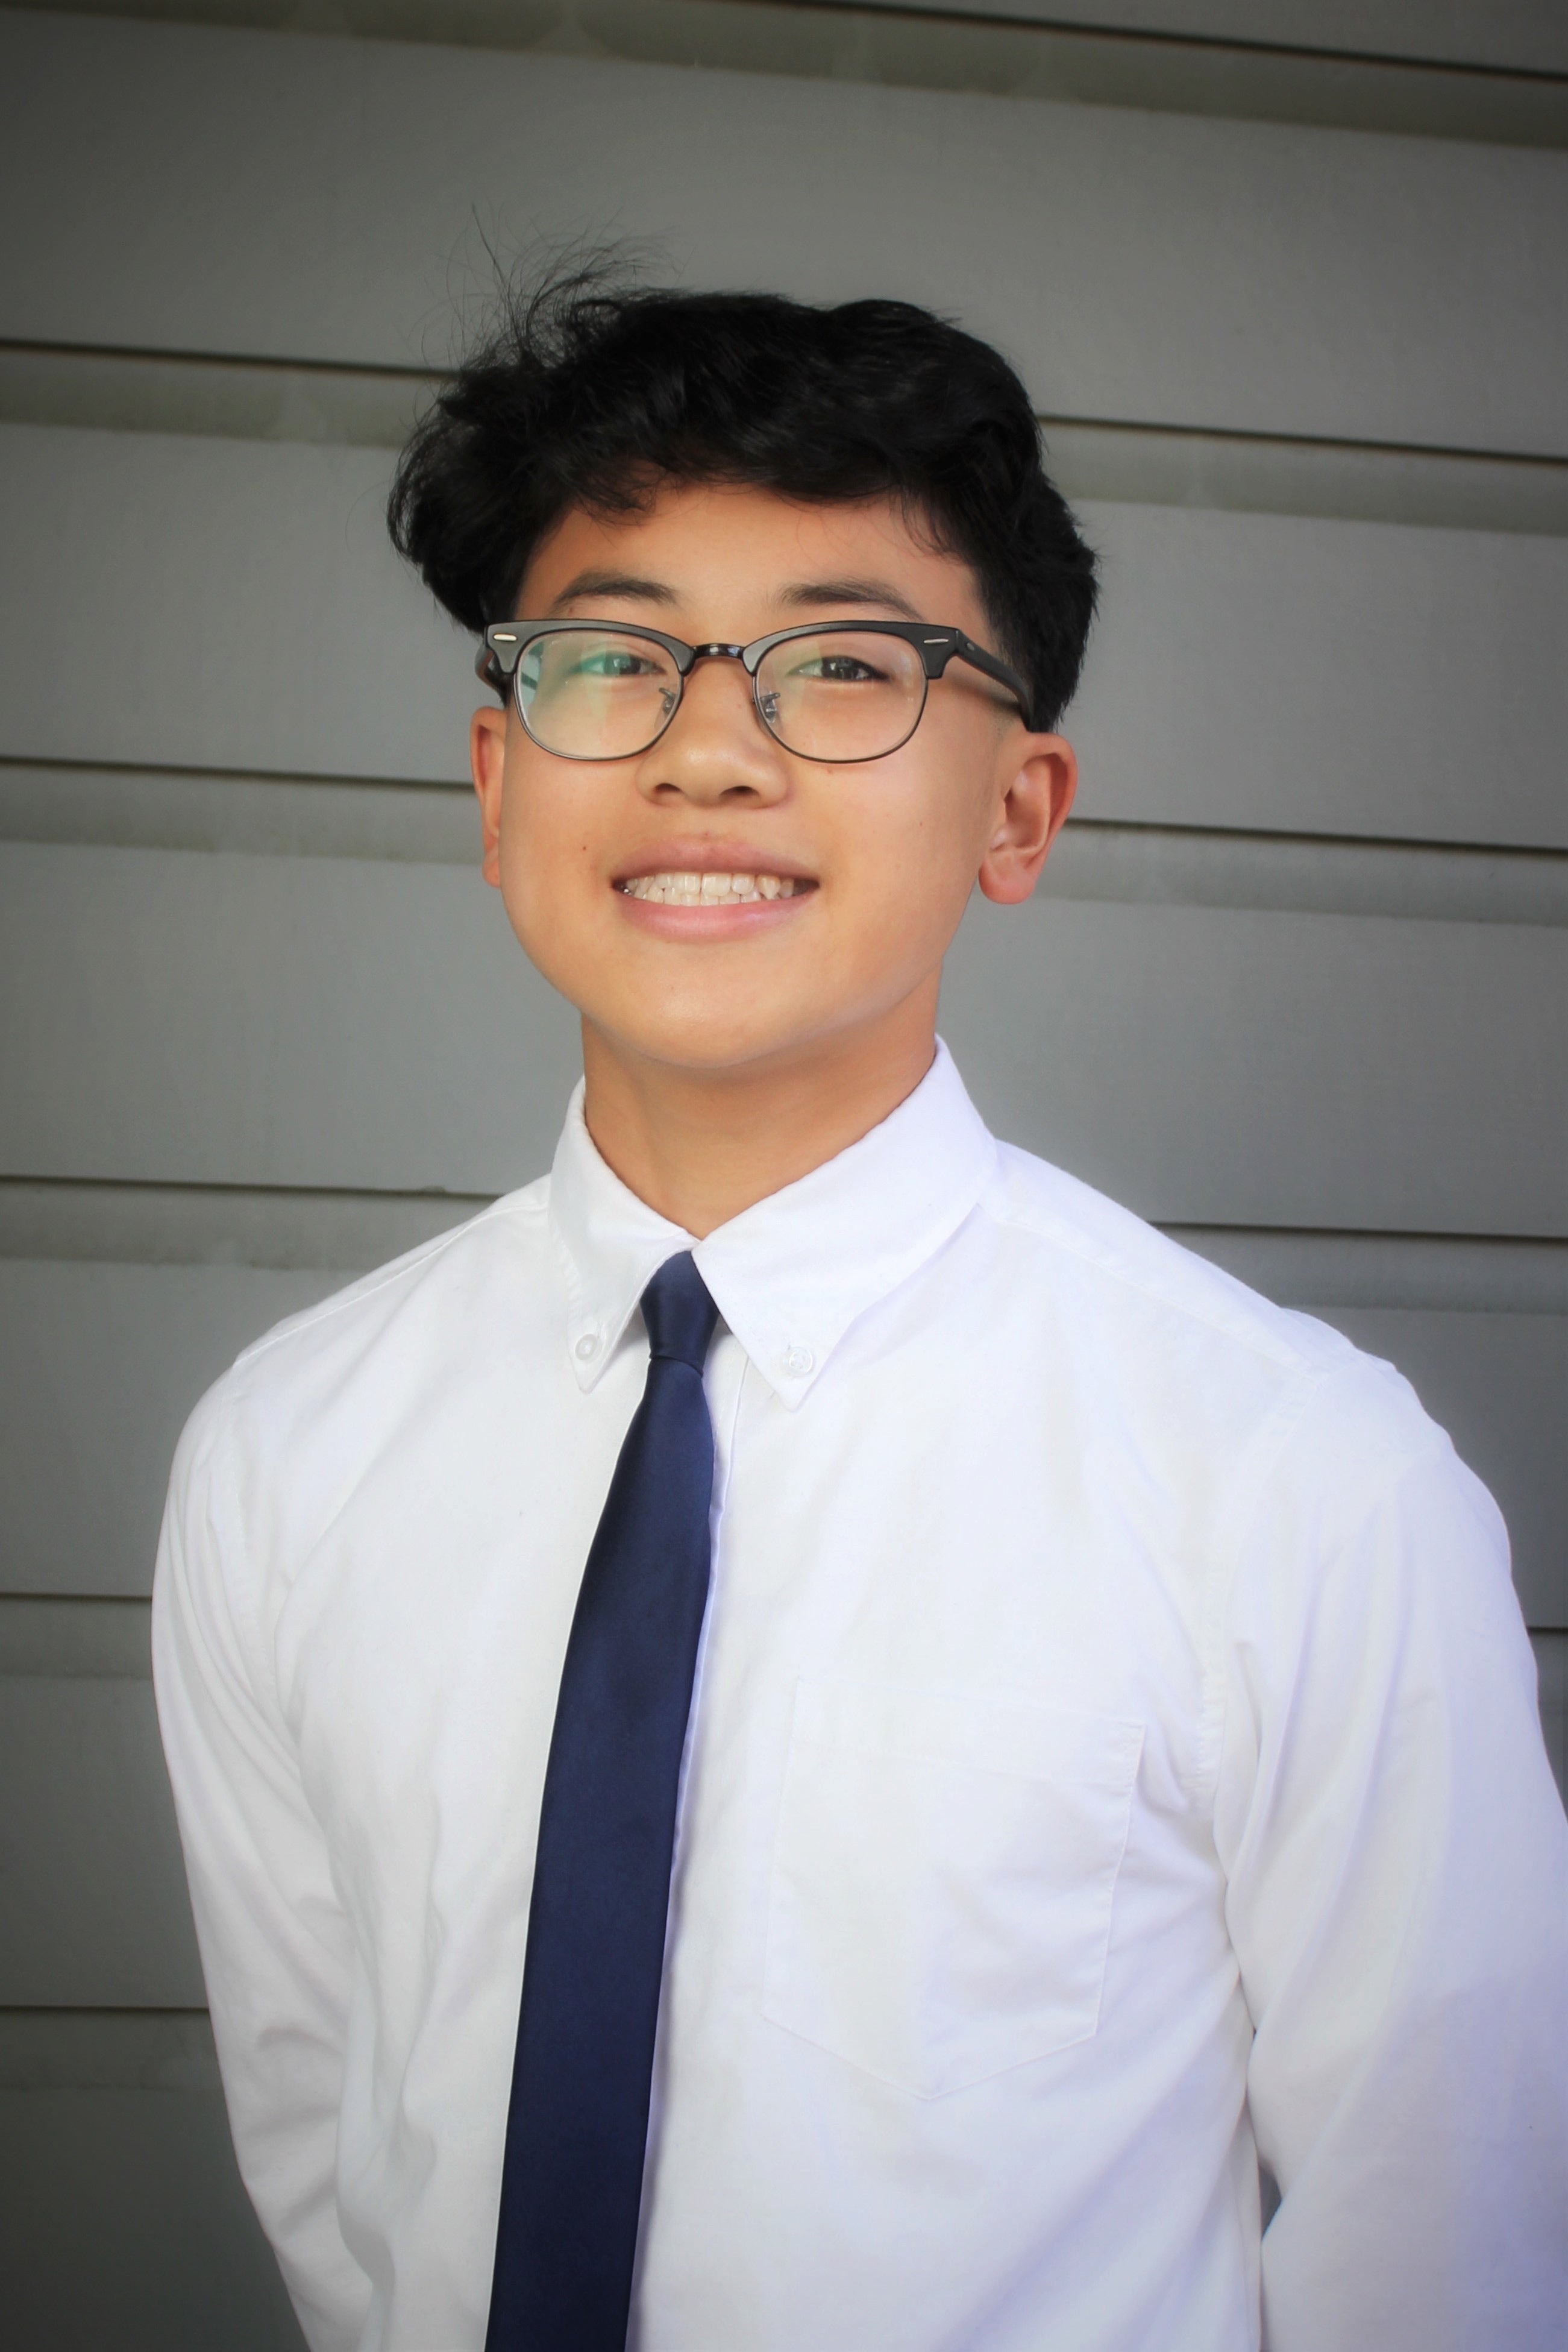 Picture of Jayden Tanaka, D1 Youth Commissioner, smiling at the camera